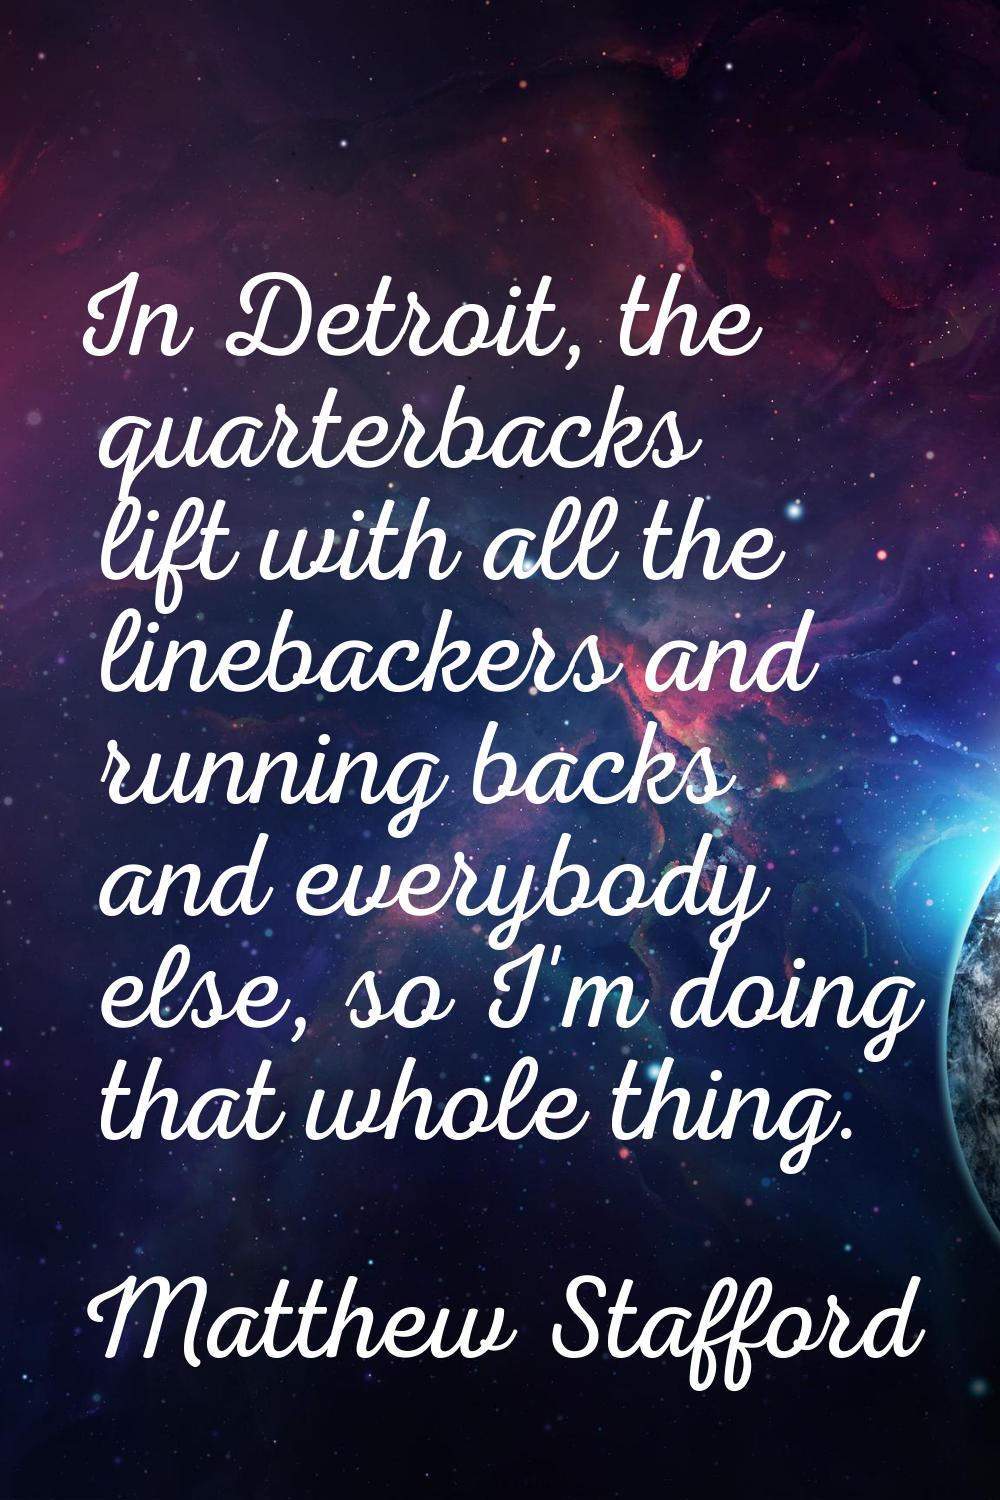 In Detroit, the quarterbacks lift with all the linebackers and running backs and everybody else, so